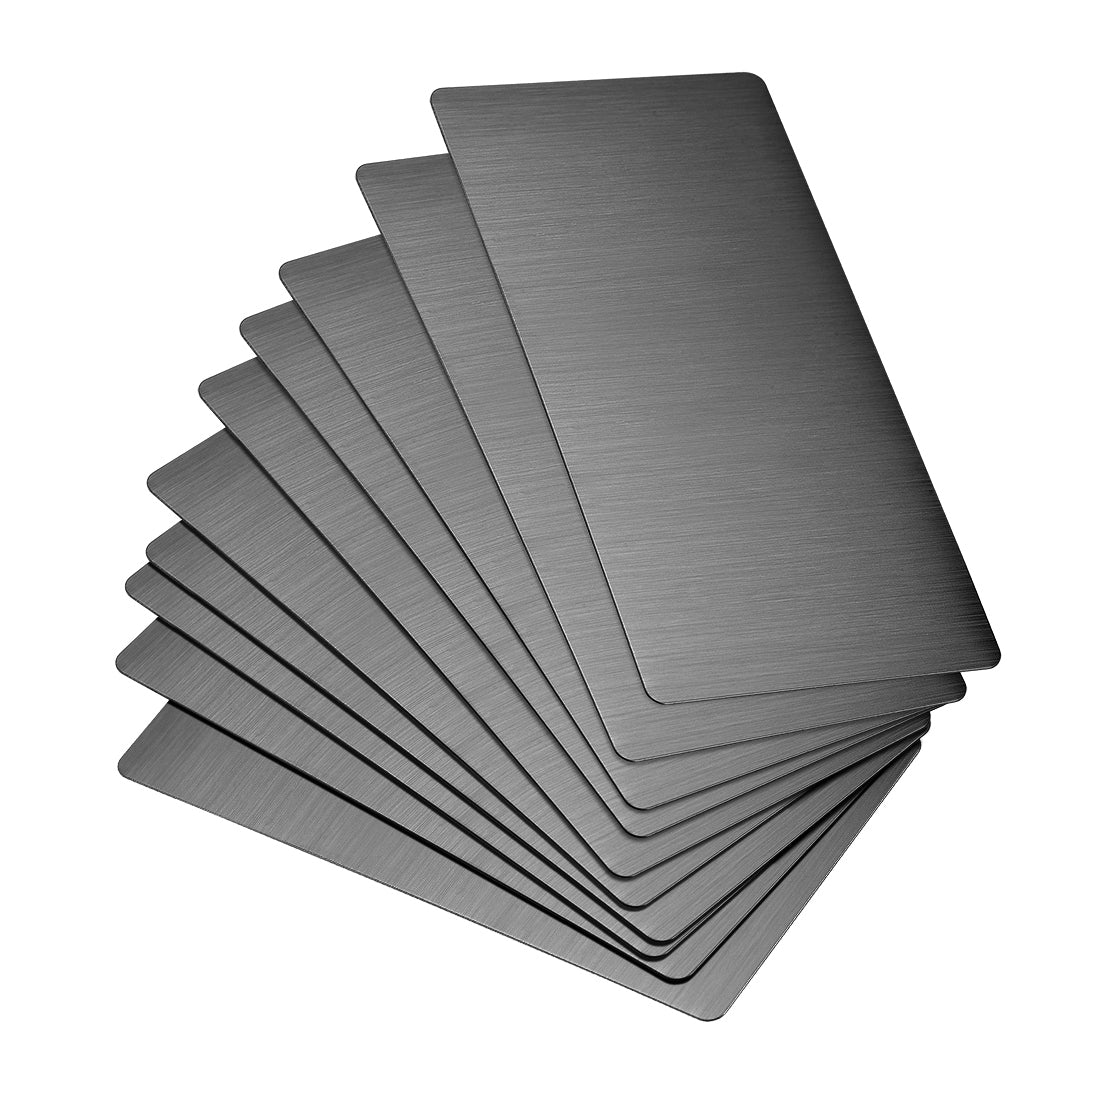 Uxcell Uxcell Blank Metal Business Card 80x50x0.4mm Brushed 201 Stainless Steel Plate for DIY Laser Printing Silver Tone 10 Pcs